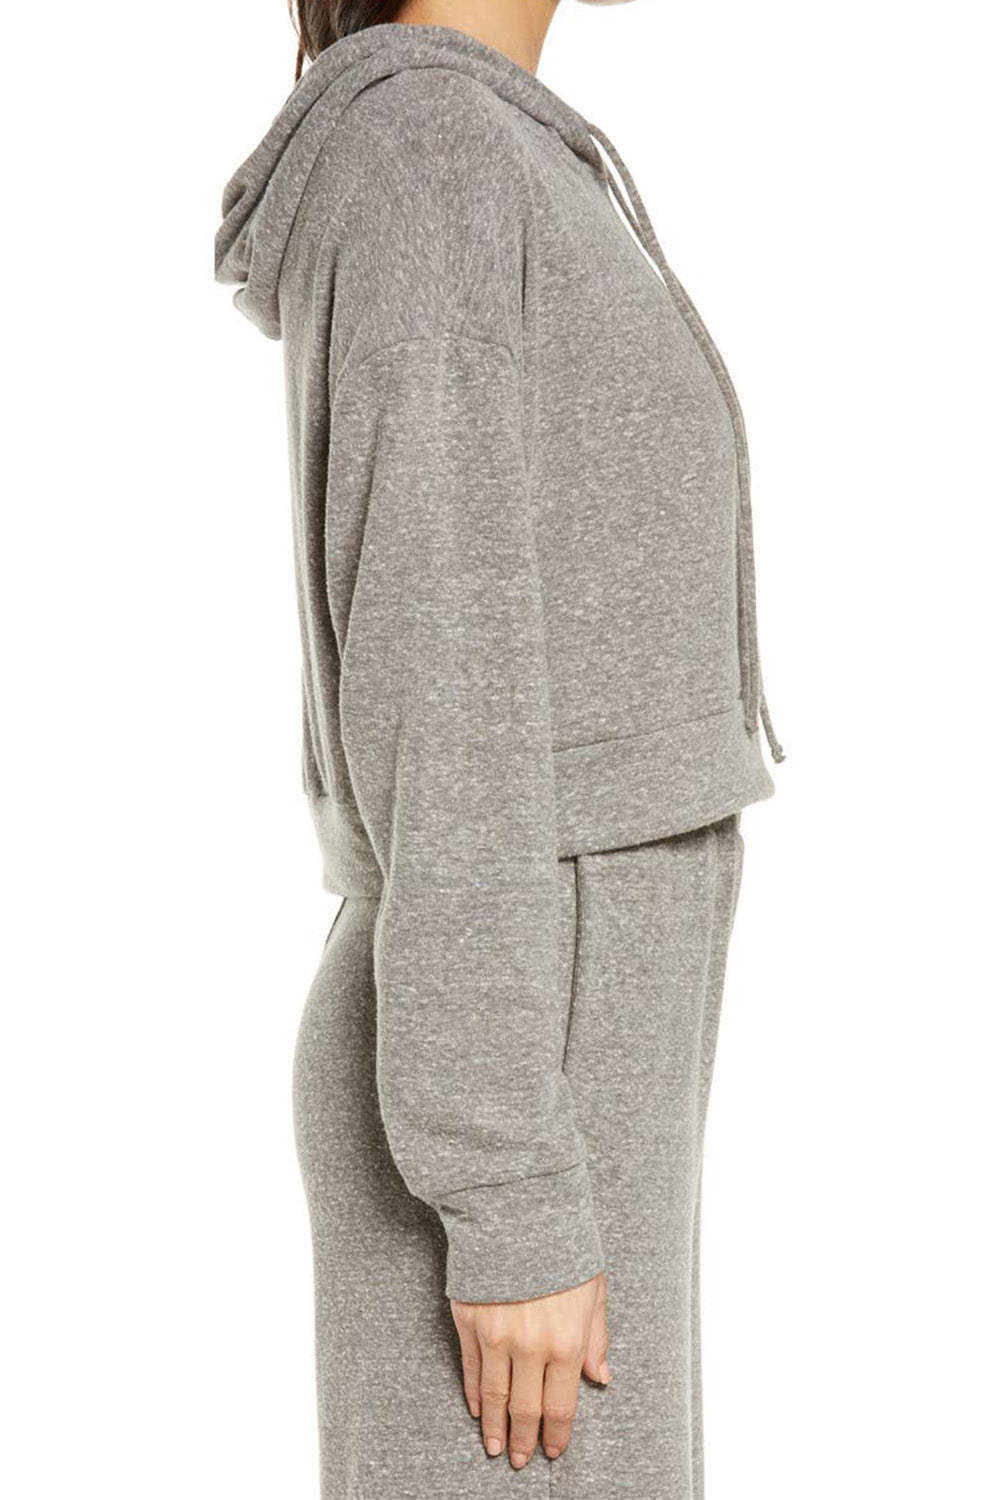 Gray Solid Drop Shoulder Hoodie and Wide Leg Pants Outfit Loungewear JT's Designer Fashion